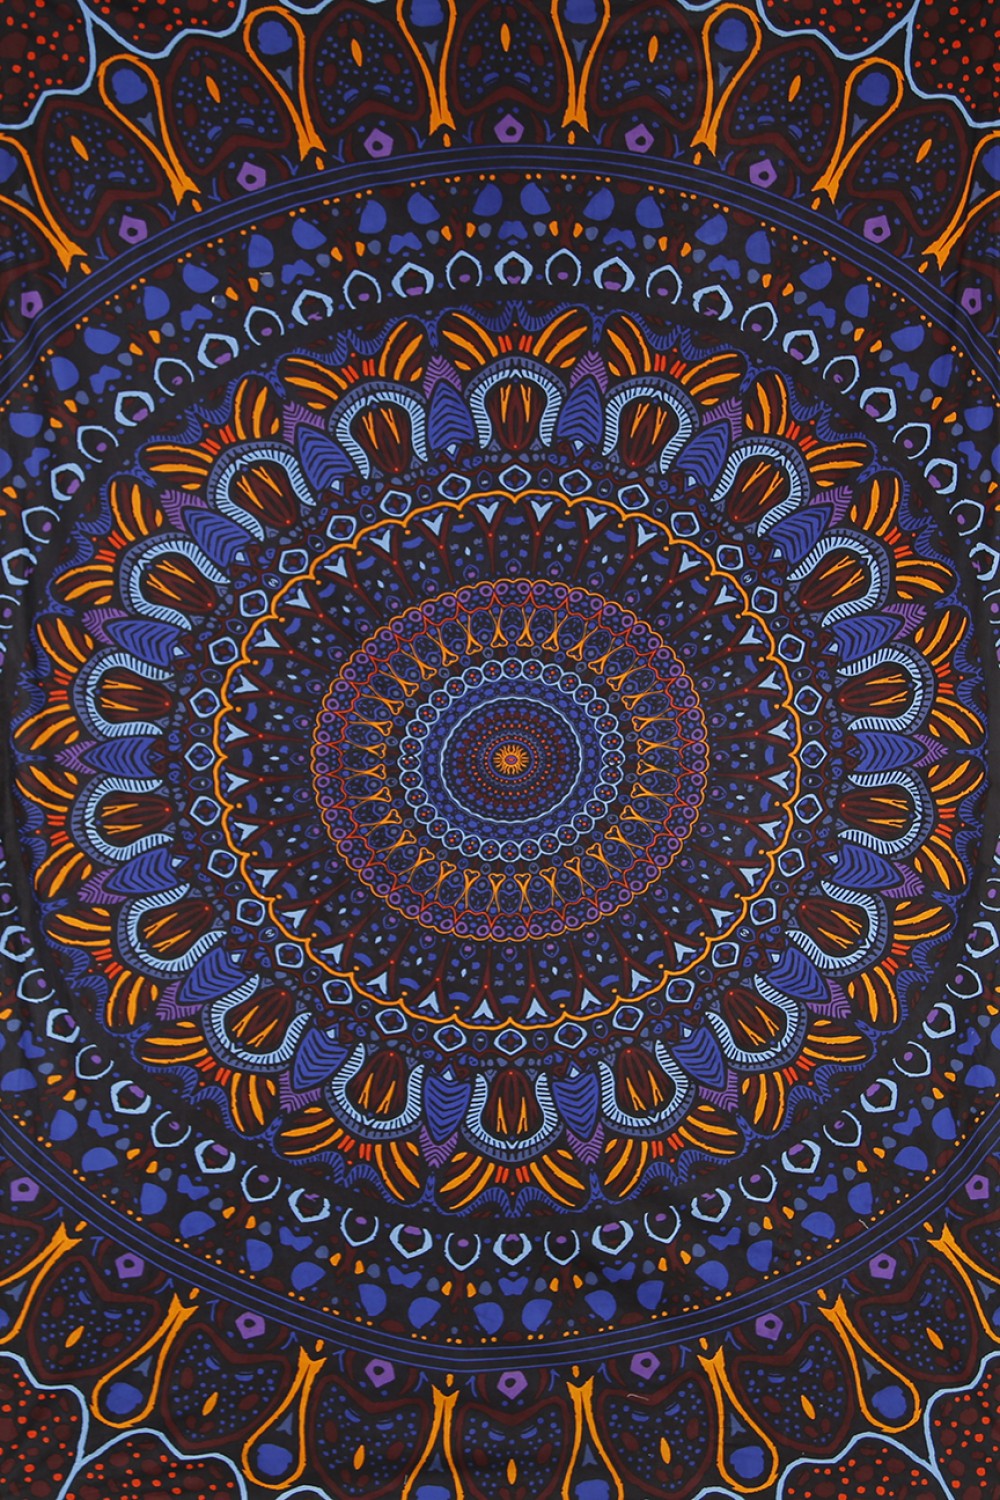 Eclipse 3D Tapestry 60x90 - Artwork by Chris Pinkerton